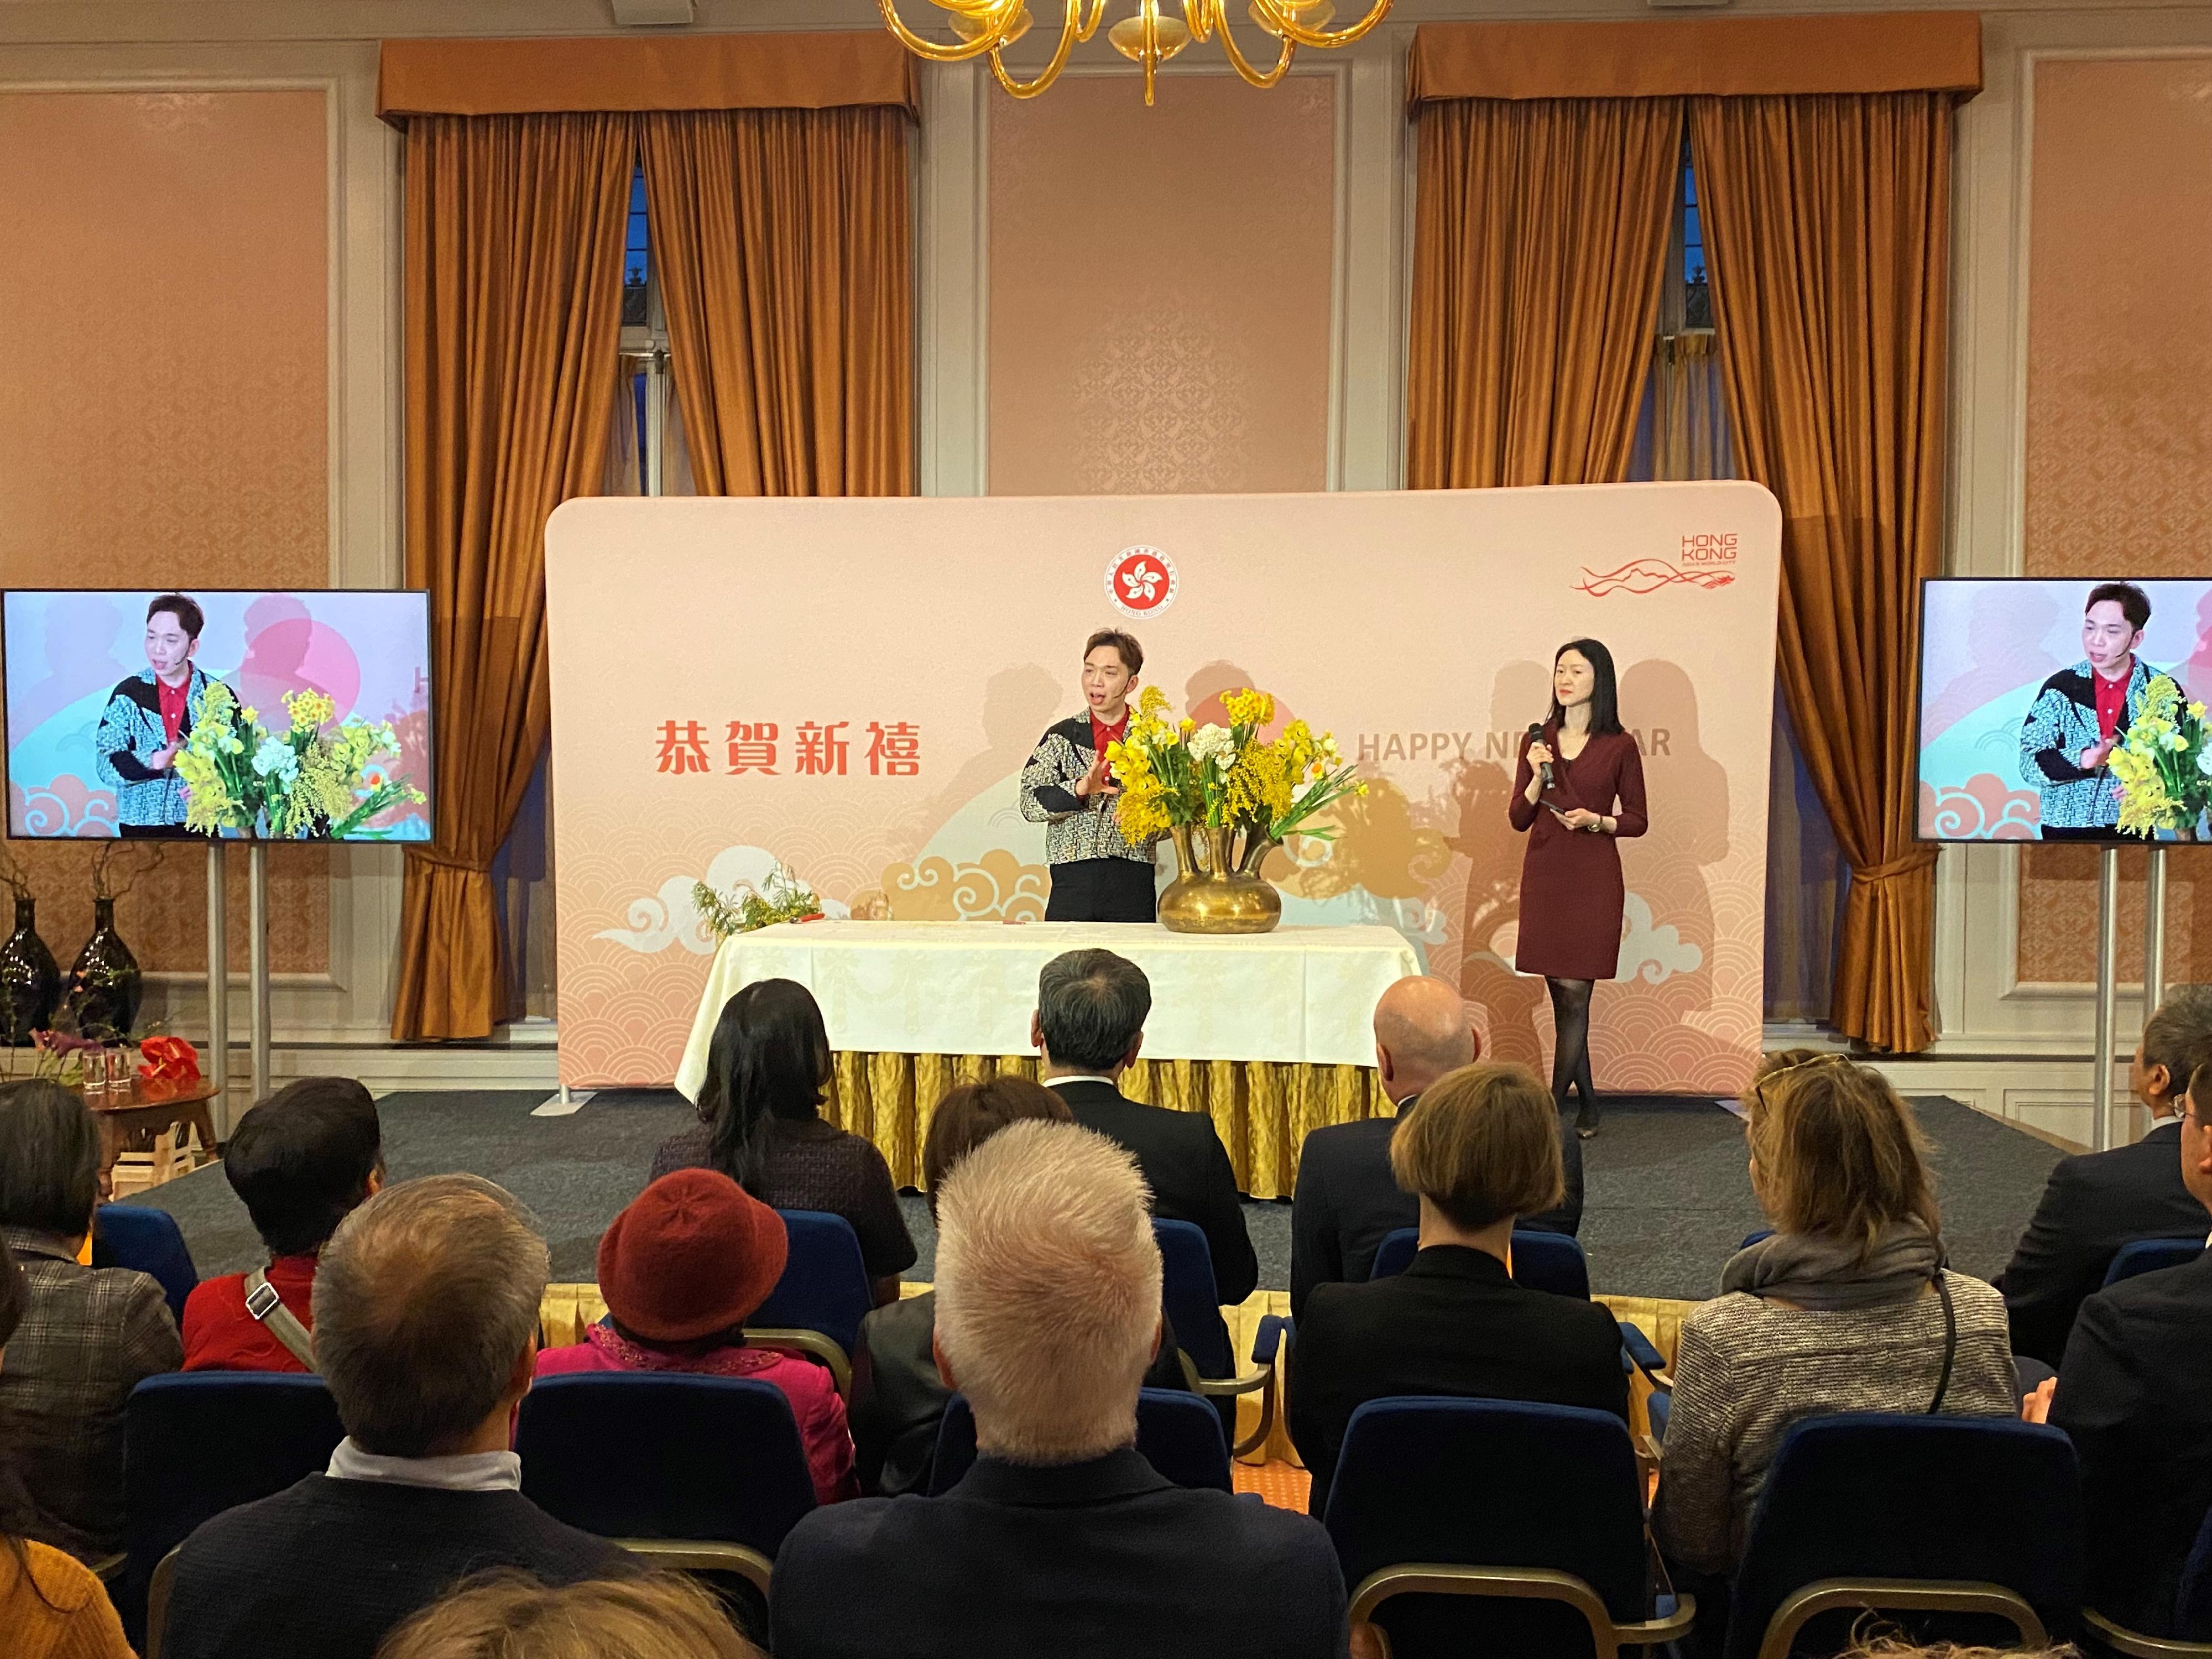 In the Chinese New Year reception held in The Hague, the Netherlands, on February 28, the guests were presented with an interesting live demonstration of flower arrangement by an internationally awarded floral artist from Hong Kong, Dr Solomon Leong, to showcase the linkage between Hong Kong and the Netherlands, and Hong Kong being a melting pot of Western and Eastern cultures.